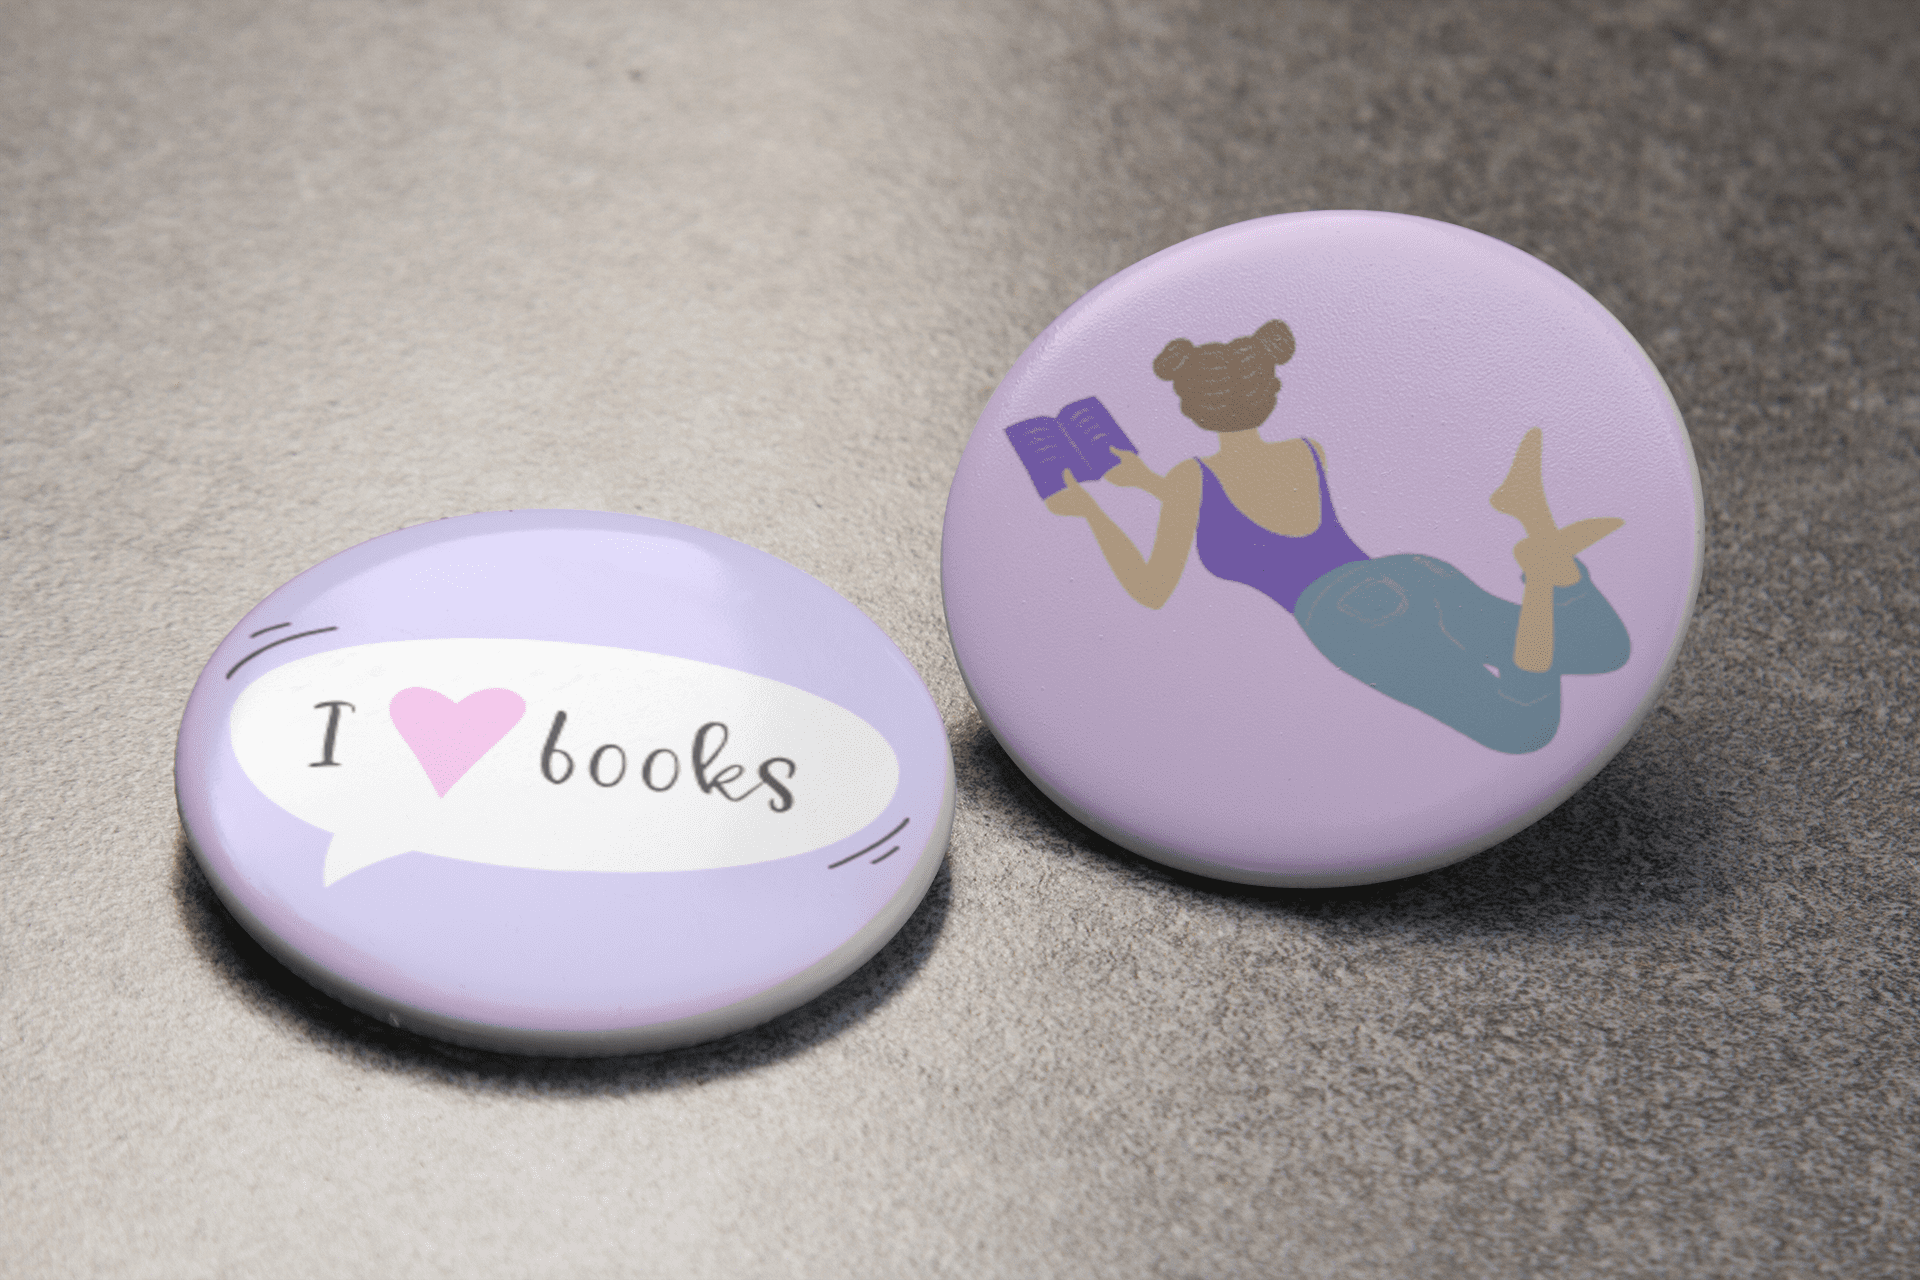 Shop our collection of To the Point Buttons featuring the adorable "I love books" design at Safi Marketplace.